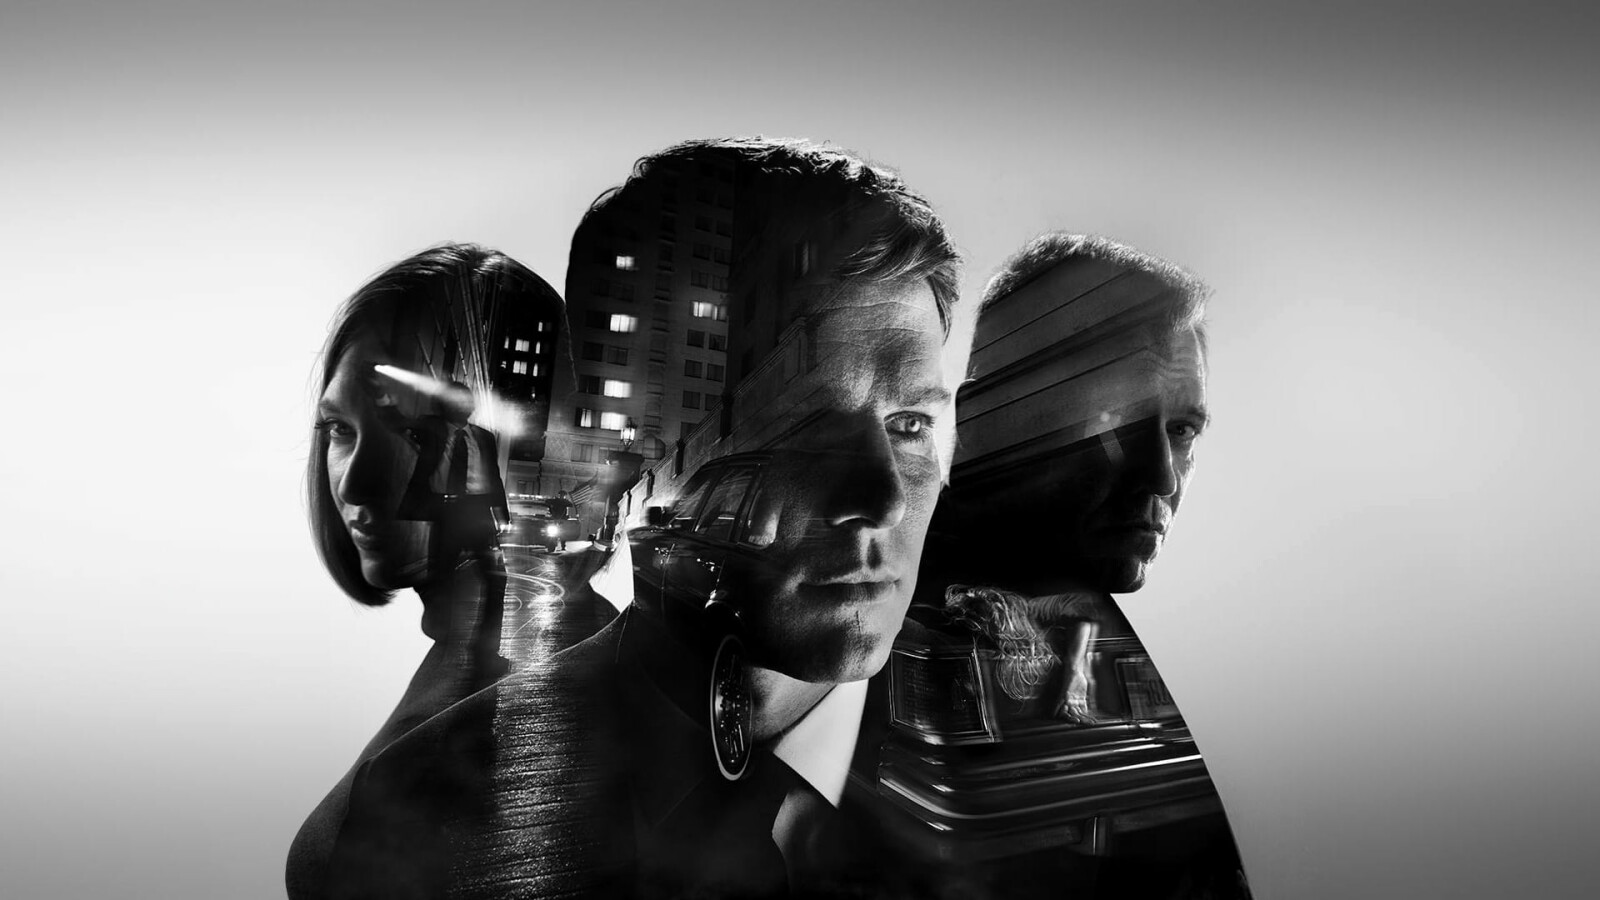 Mindhunter Alternatives: This exciting series is a must see

